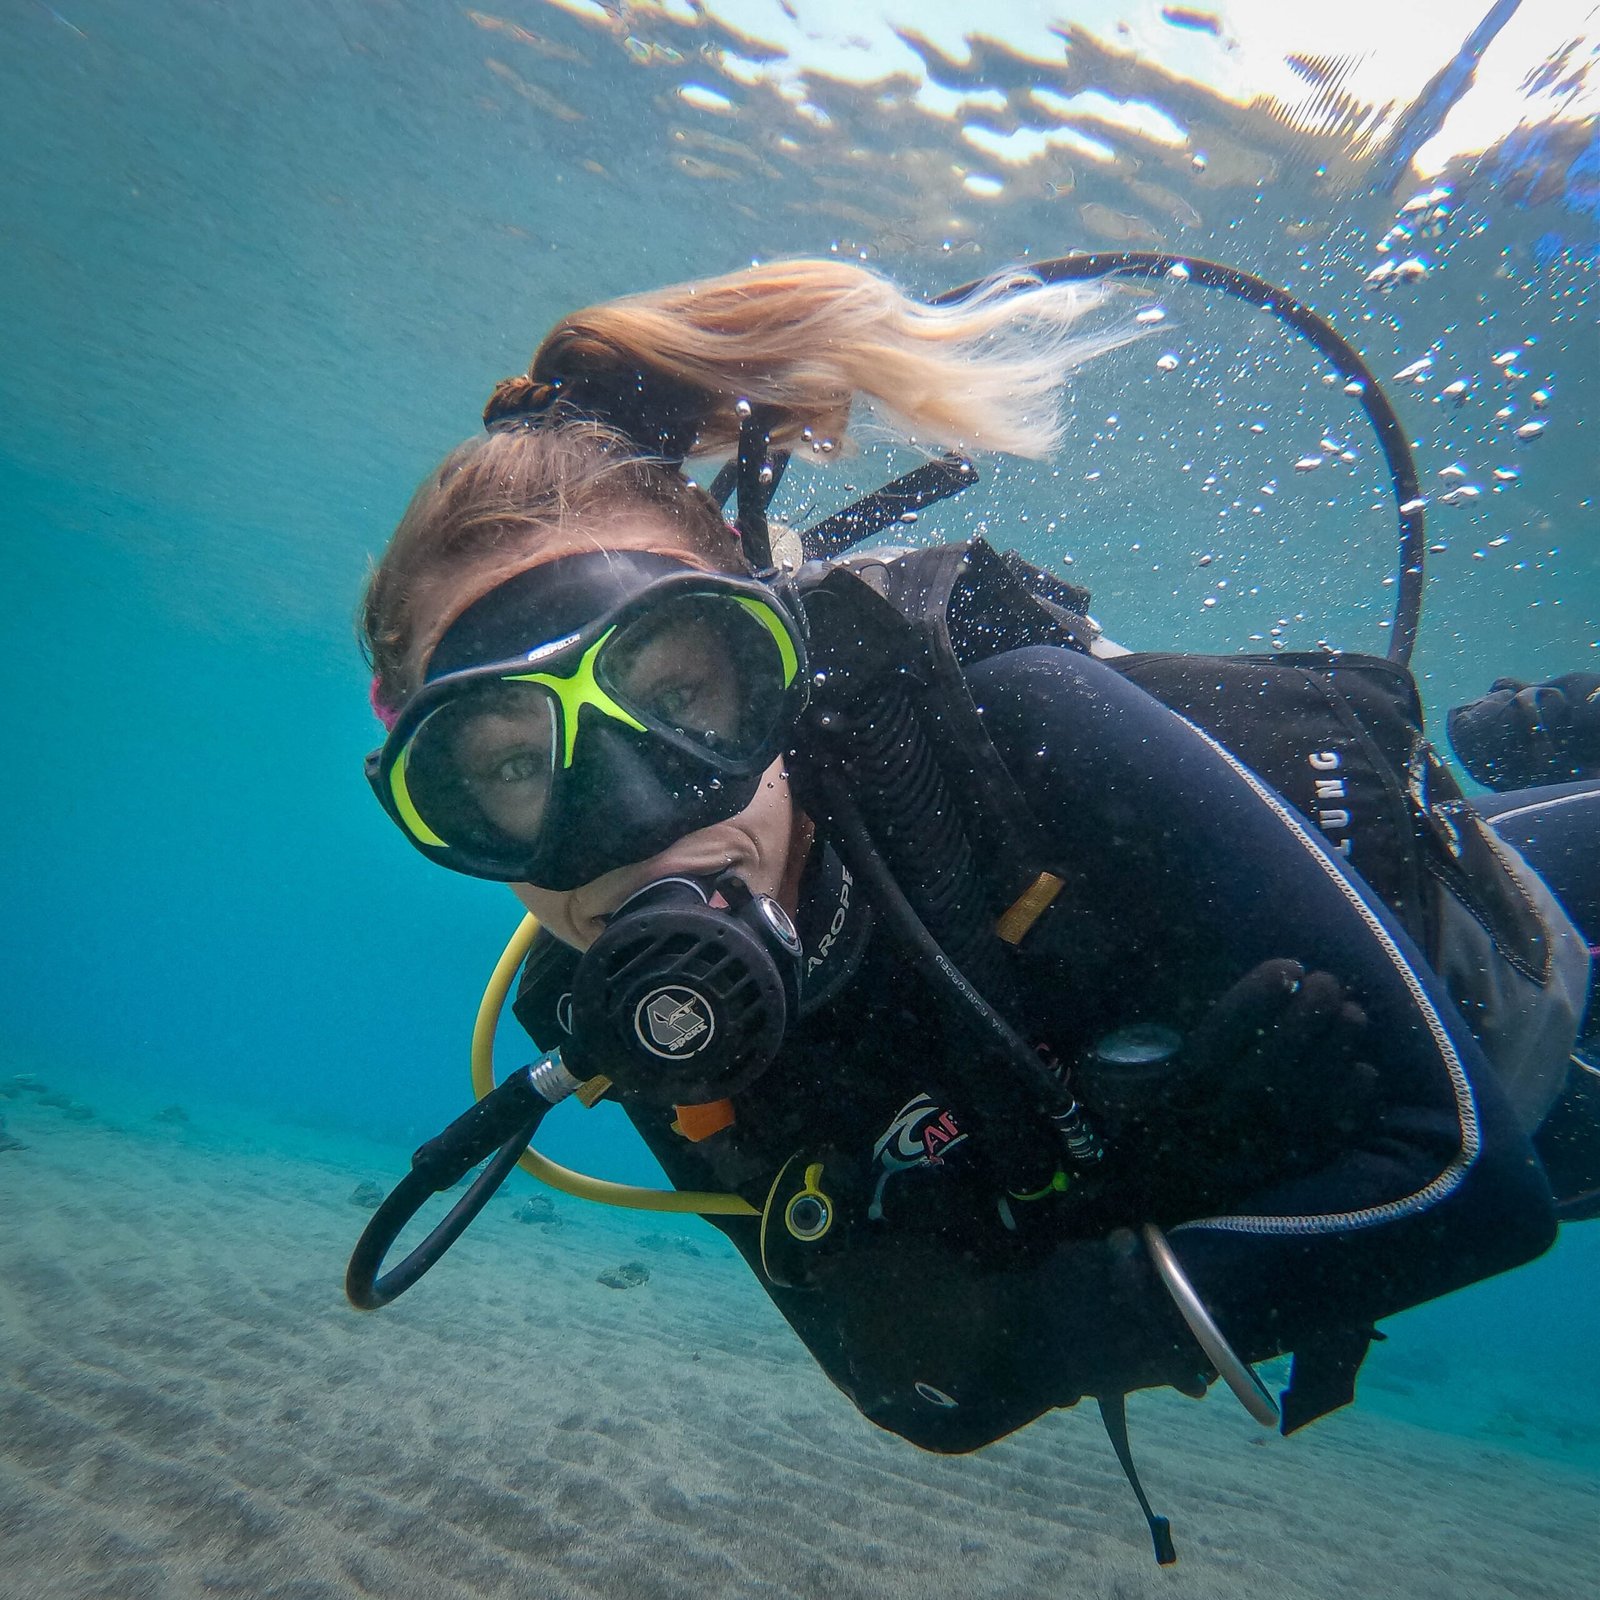 Become one with the ocean with our PADI Peak Performance Buoyancy Specialty course in Bali Diversity, Amed